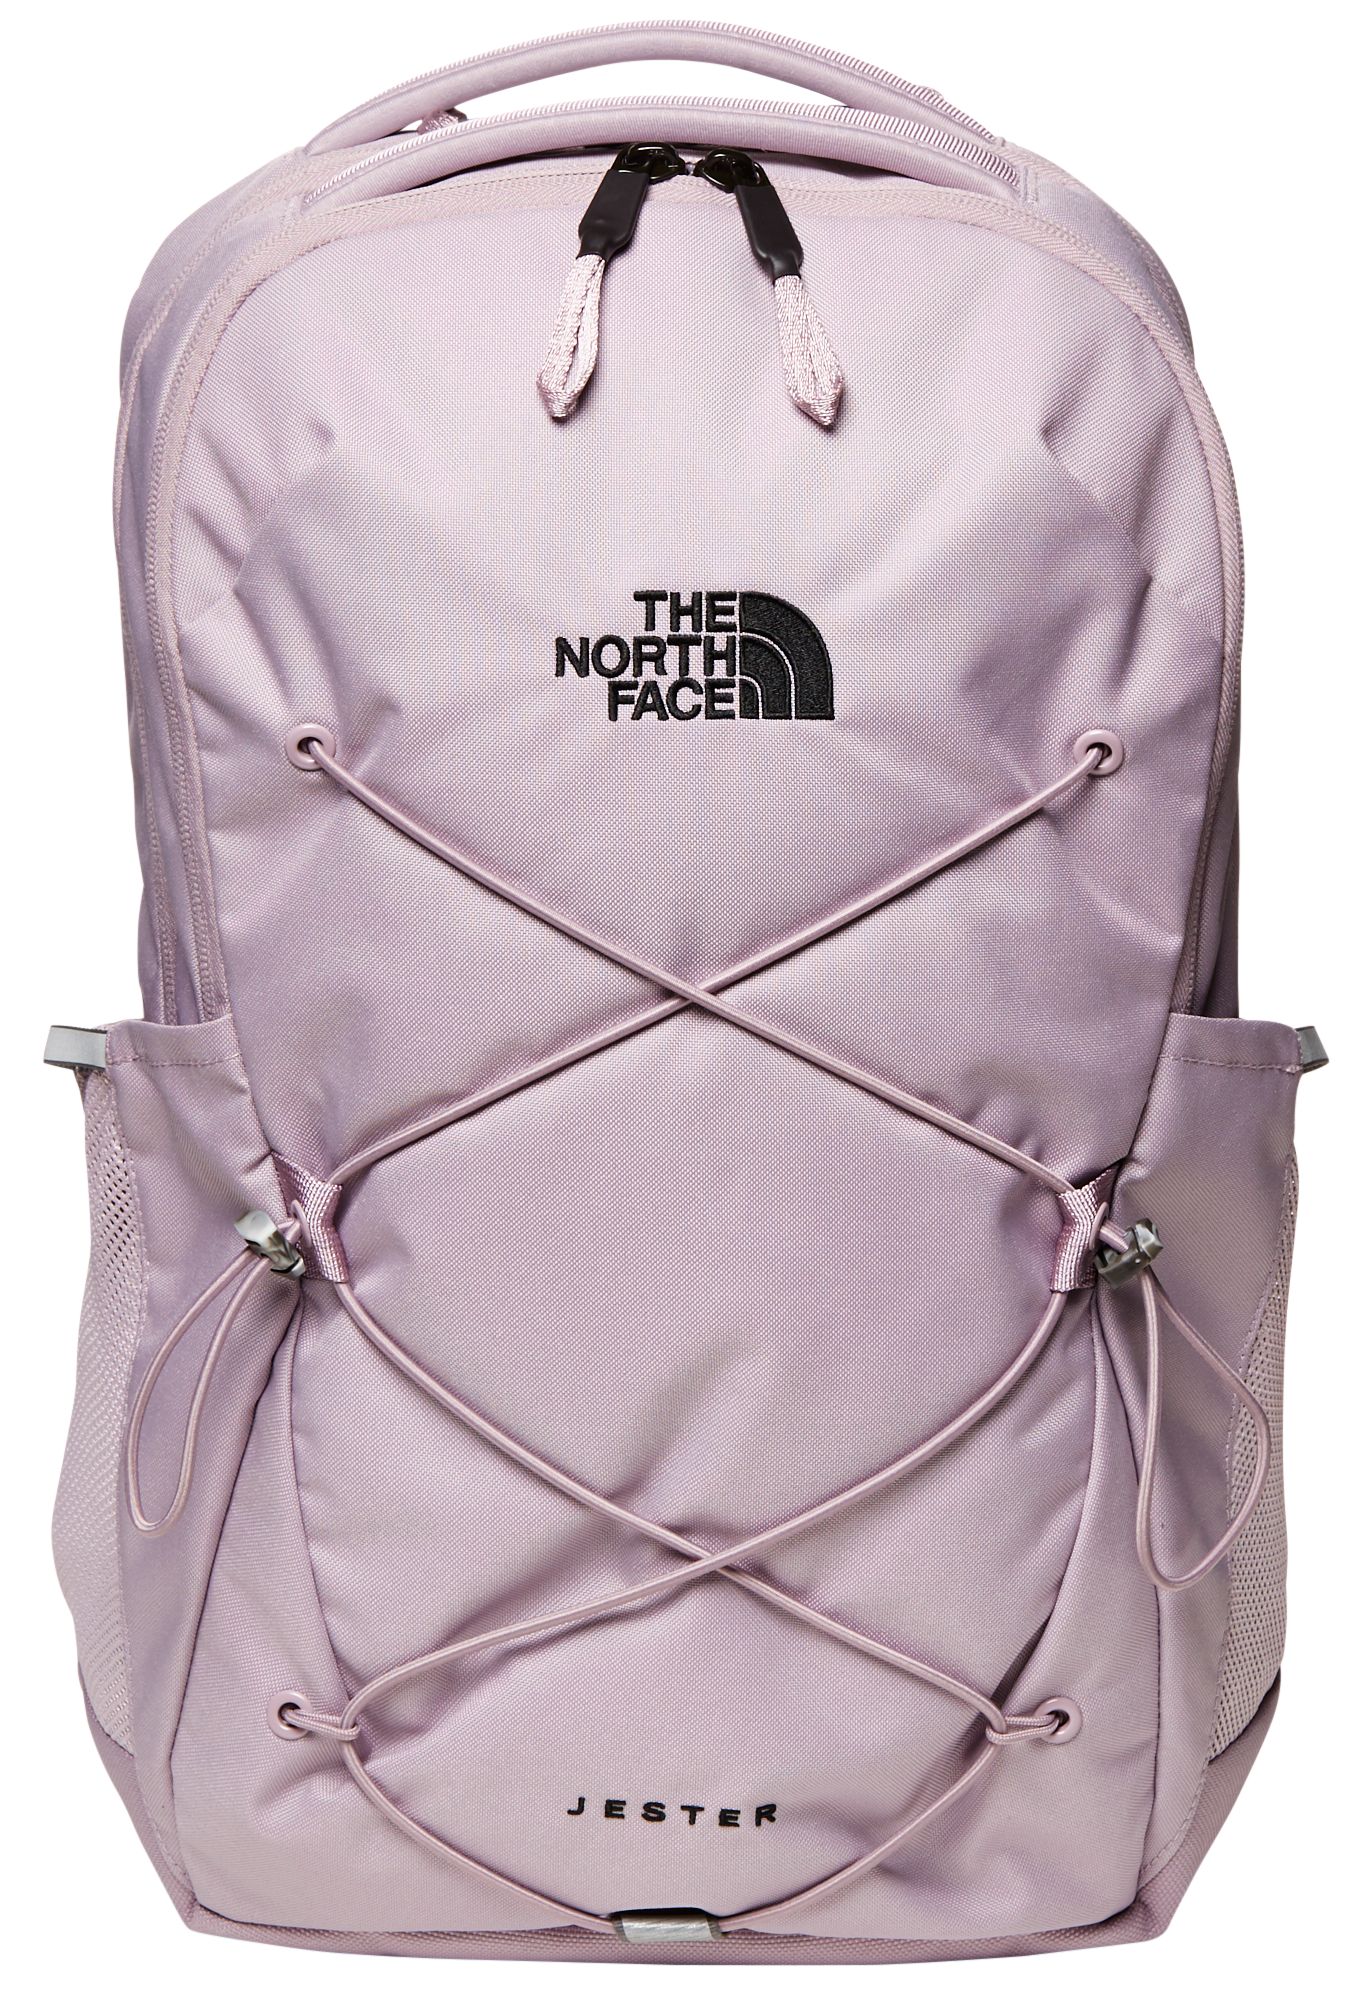 north face pink and grey backpack